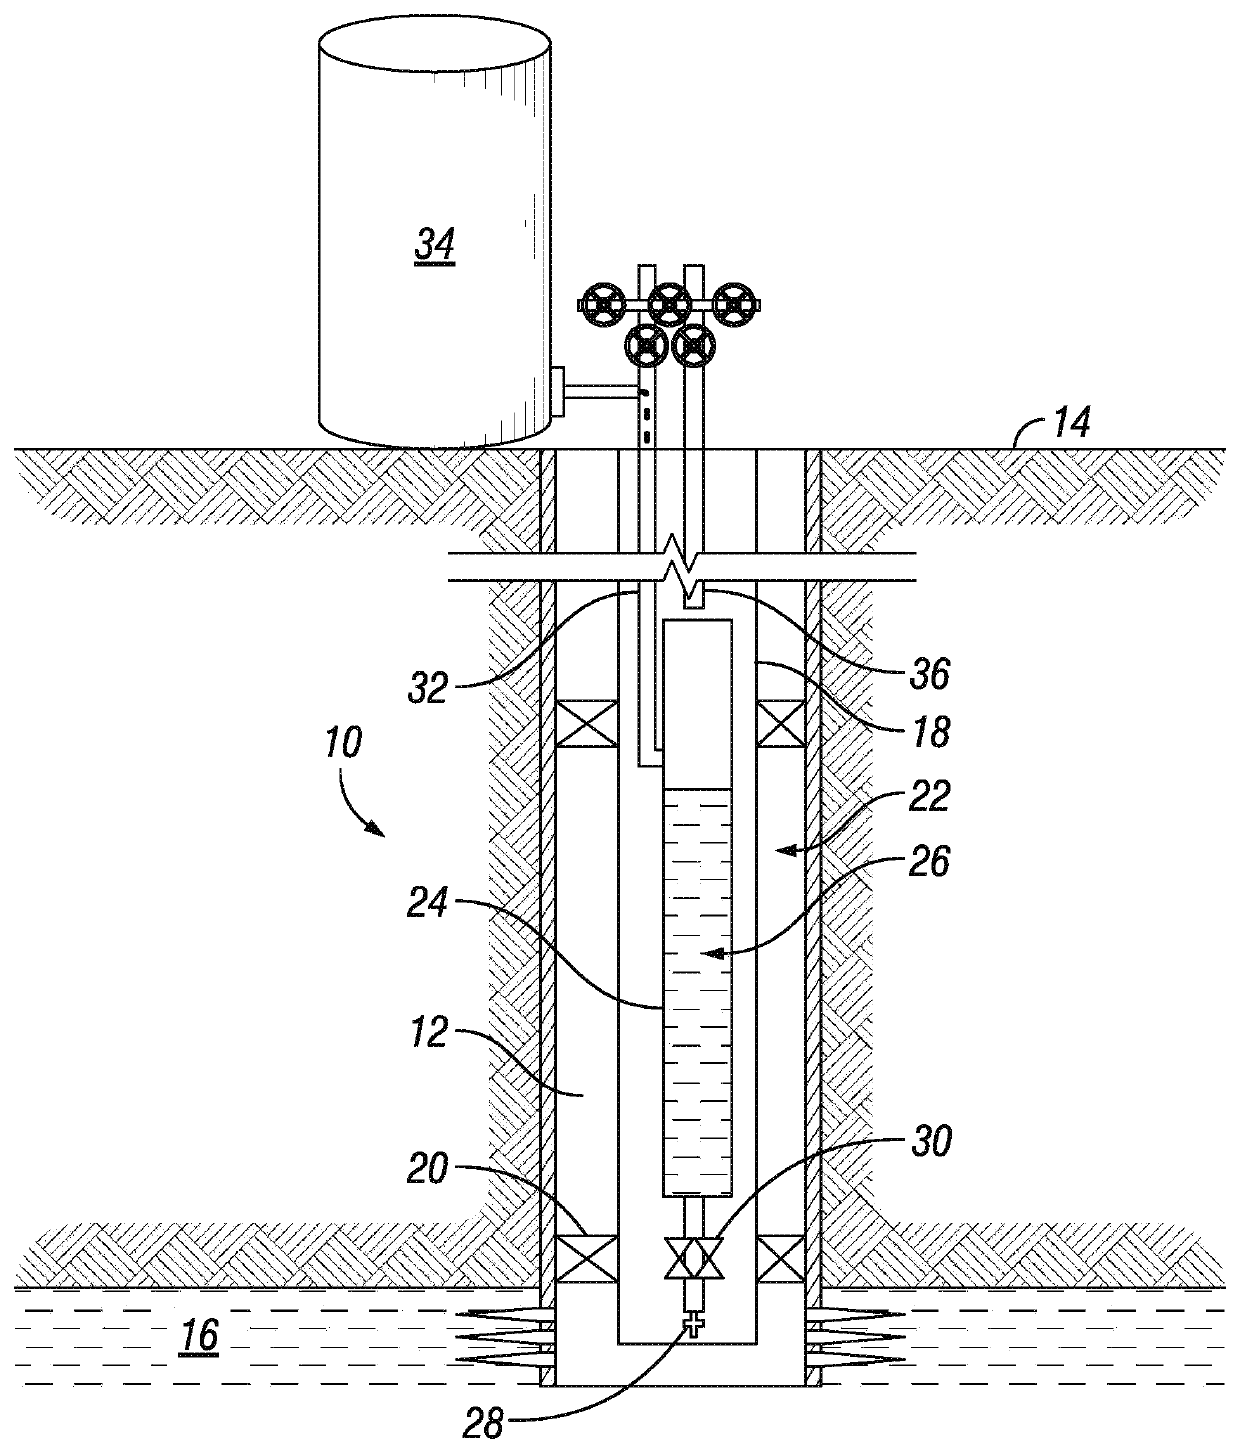 Downhole scale and corrosion mitigation